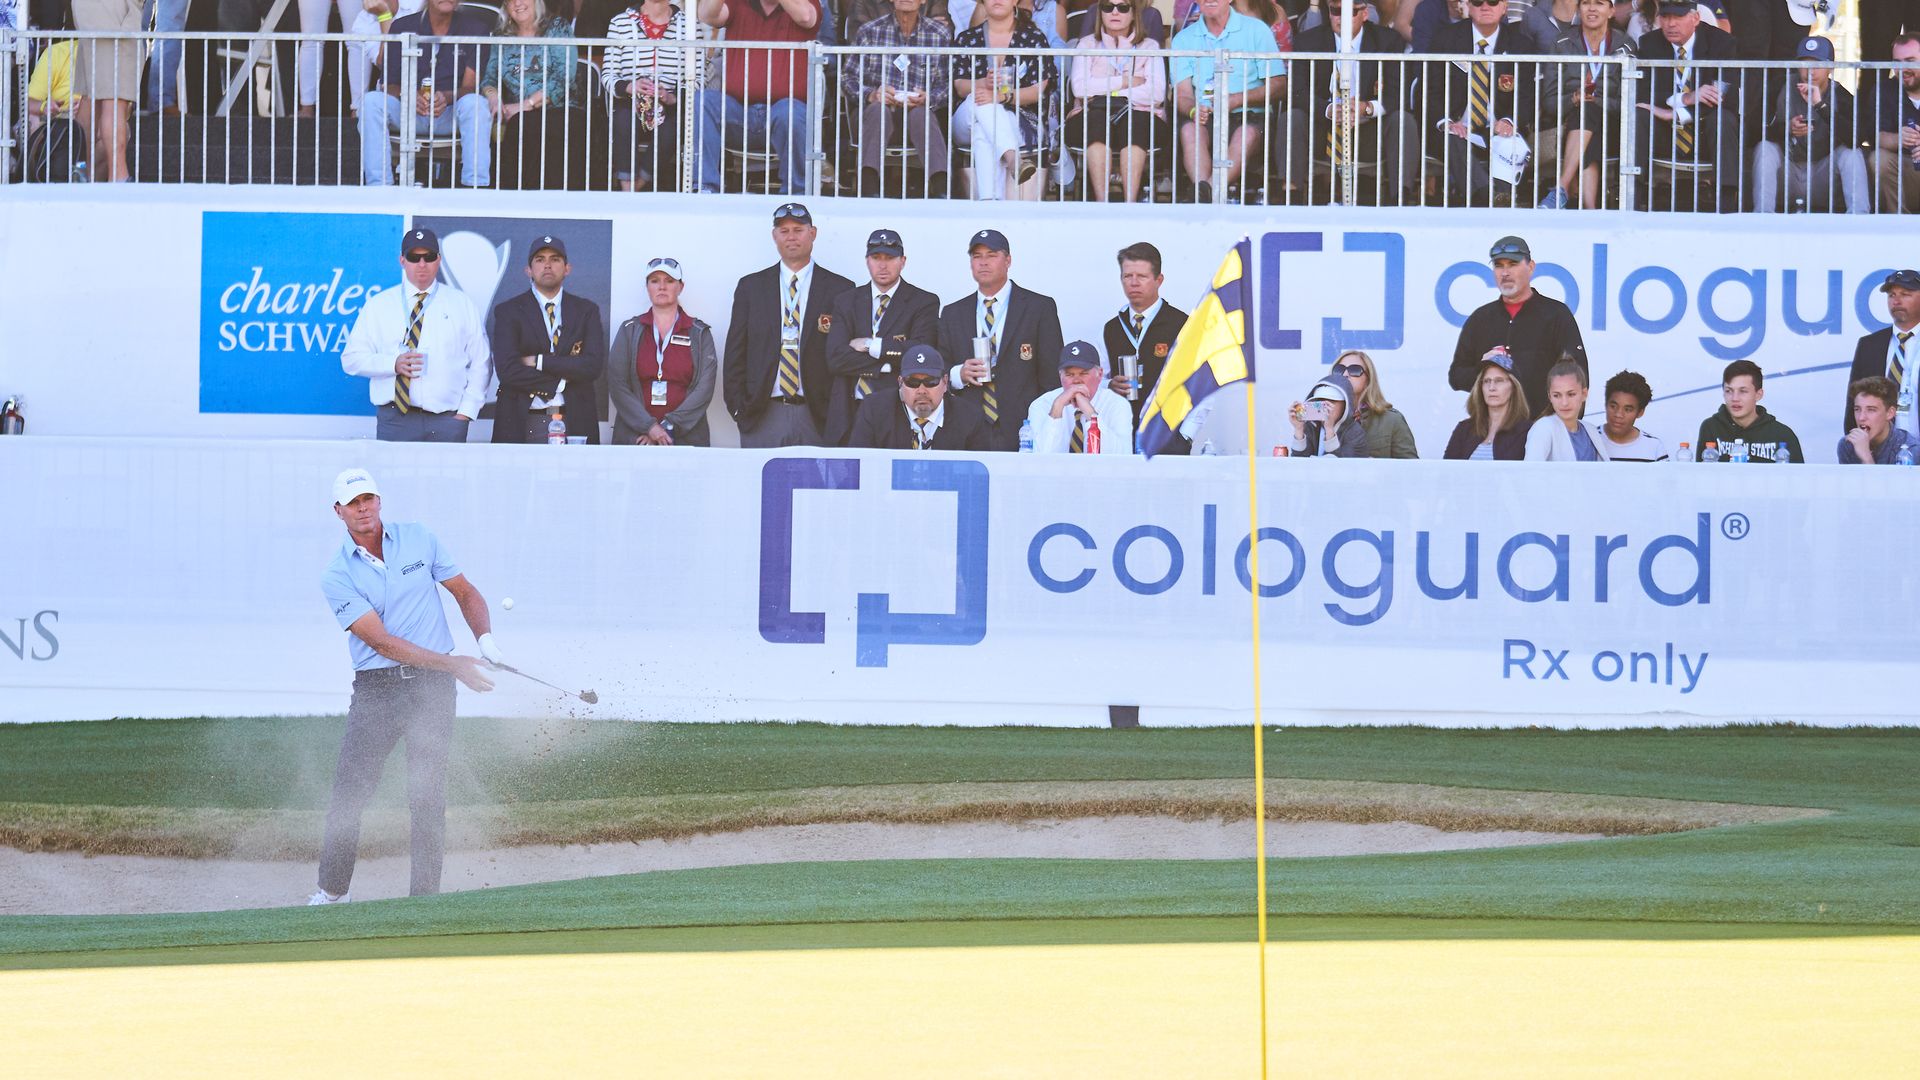 A golfer hits a shot at a 2018 tournament sponsored by Cologuard.